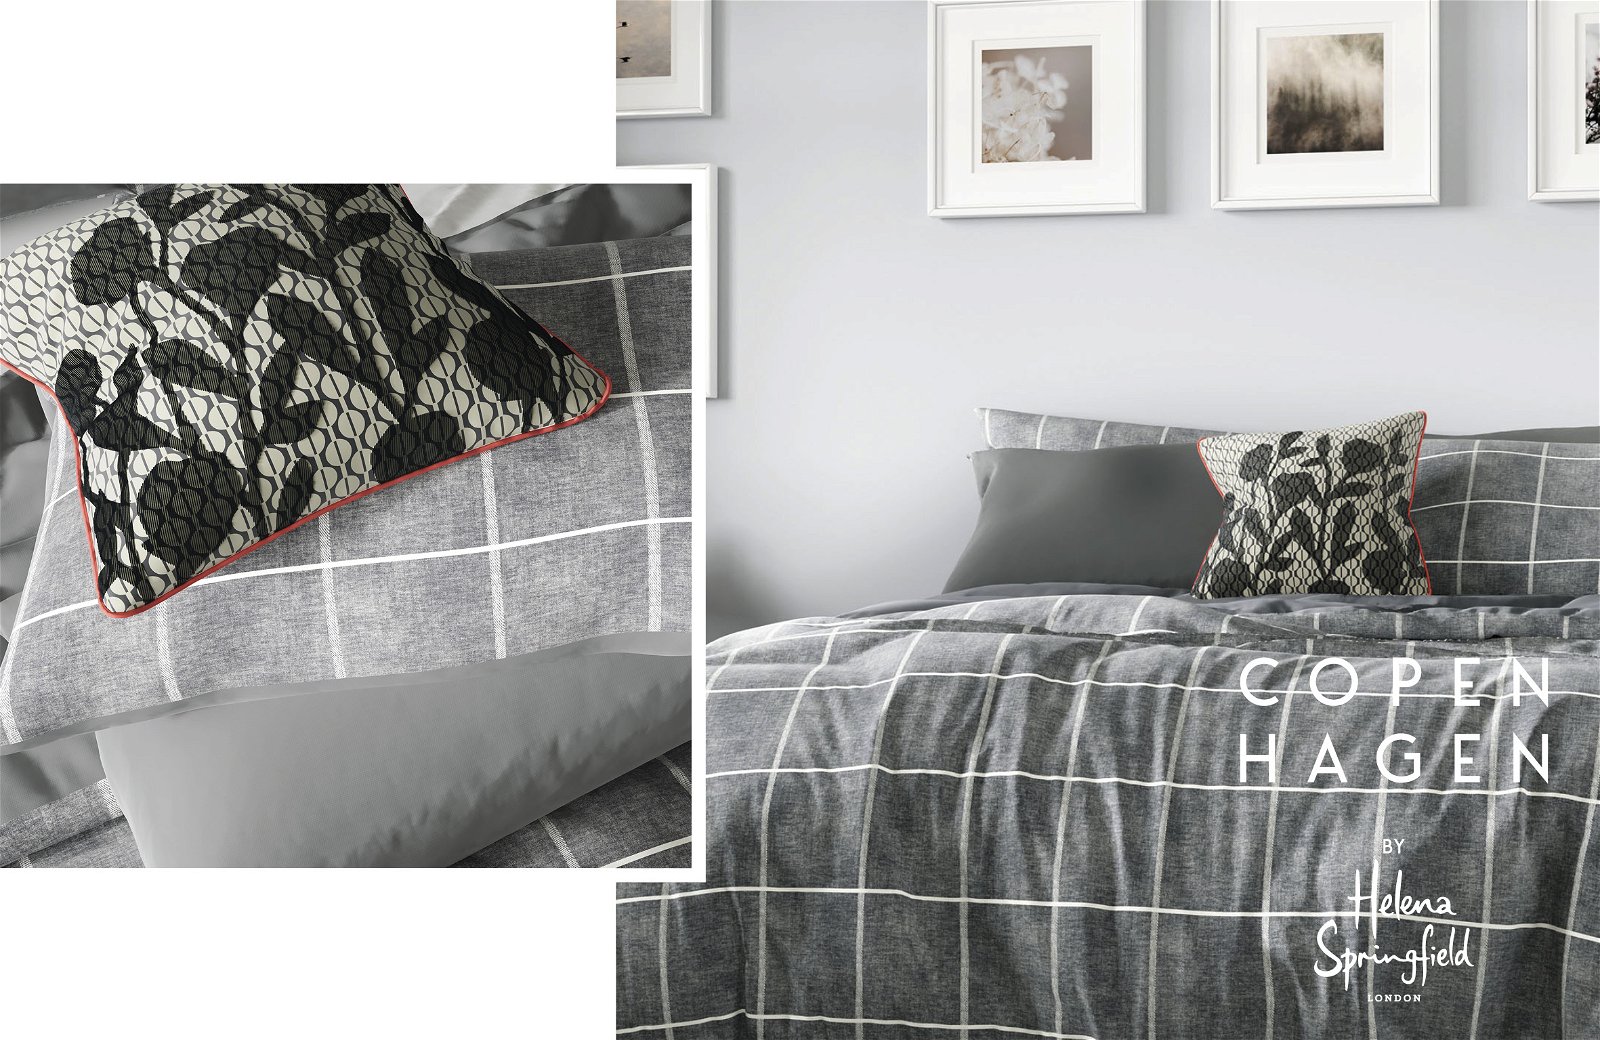 Helena Springfield Check Bedding in Charcoal